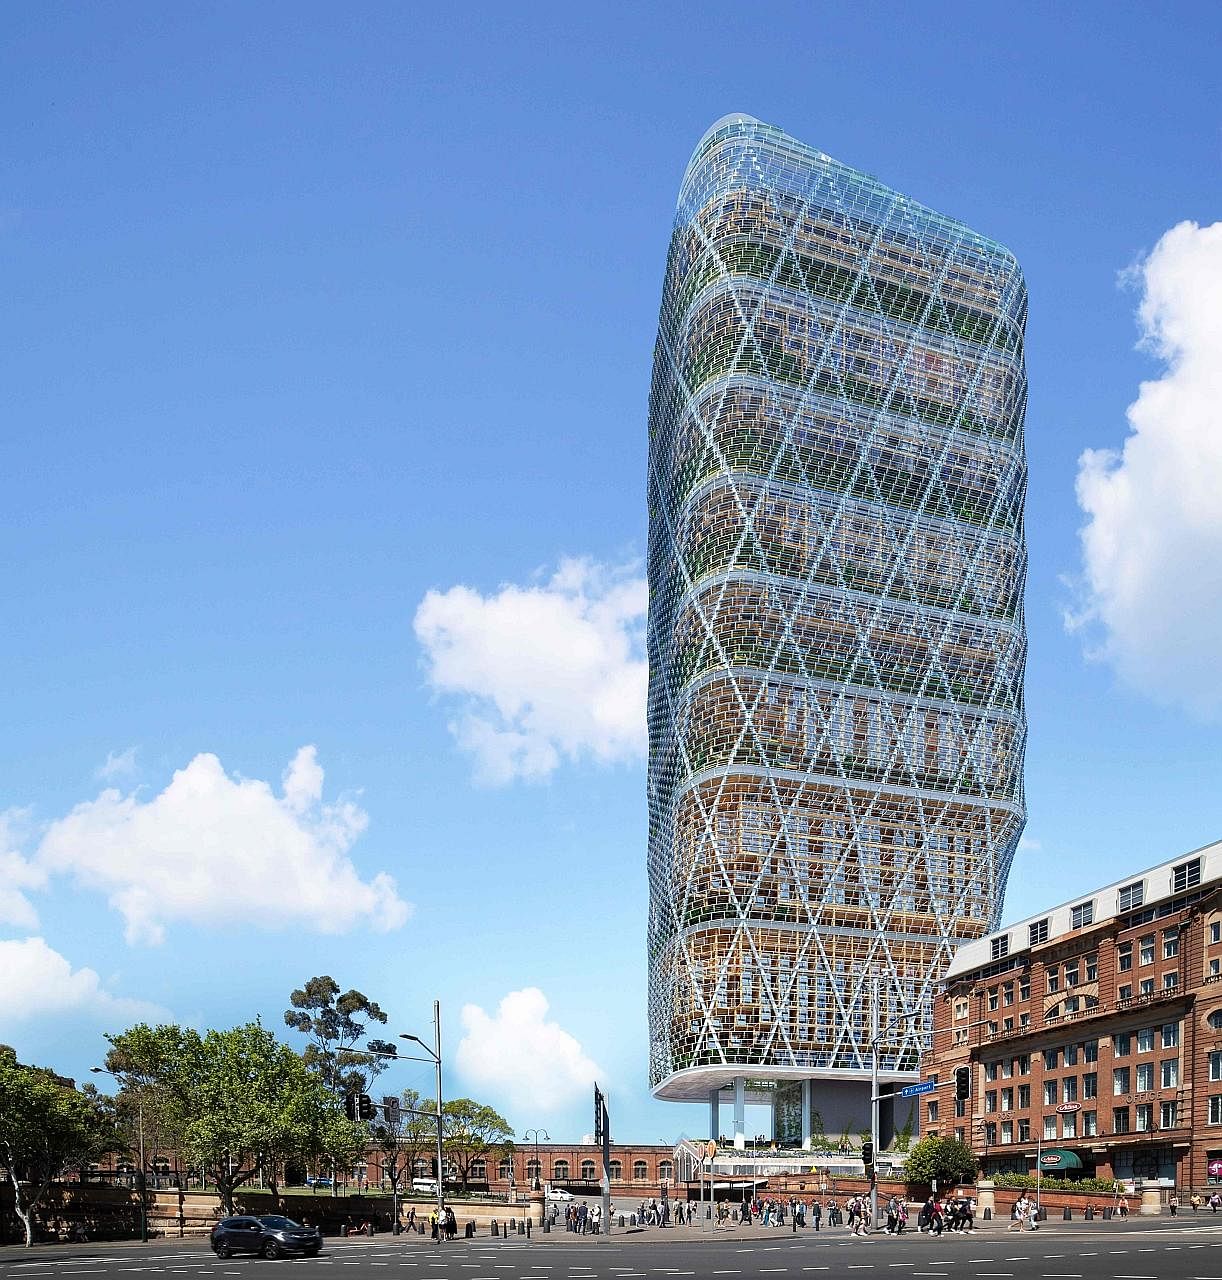 Global software giant Atlassian will build the world's tallest "hybrid timber" building for its new headquarters in Sydney, the company said yesterday. The 40-storey structure (above), coming in at 180m, will be built with timber mass - layers of sof